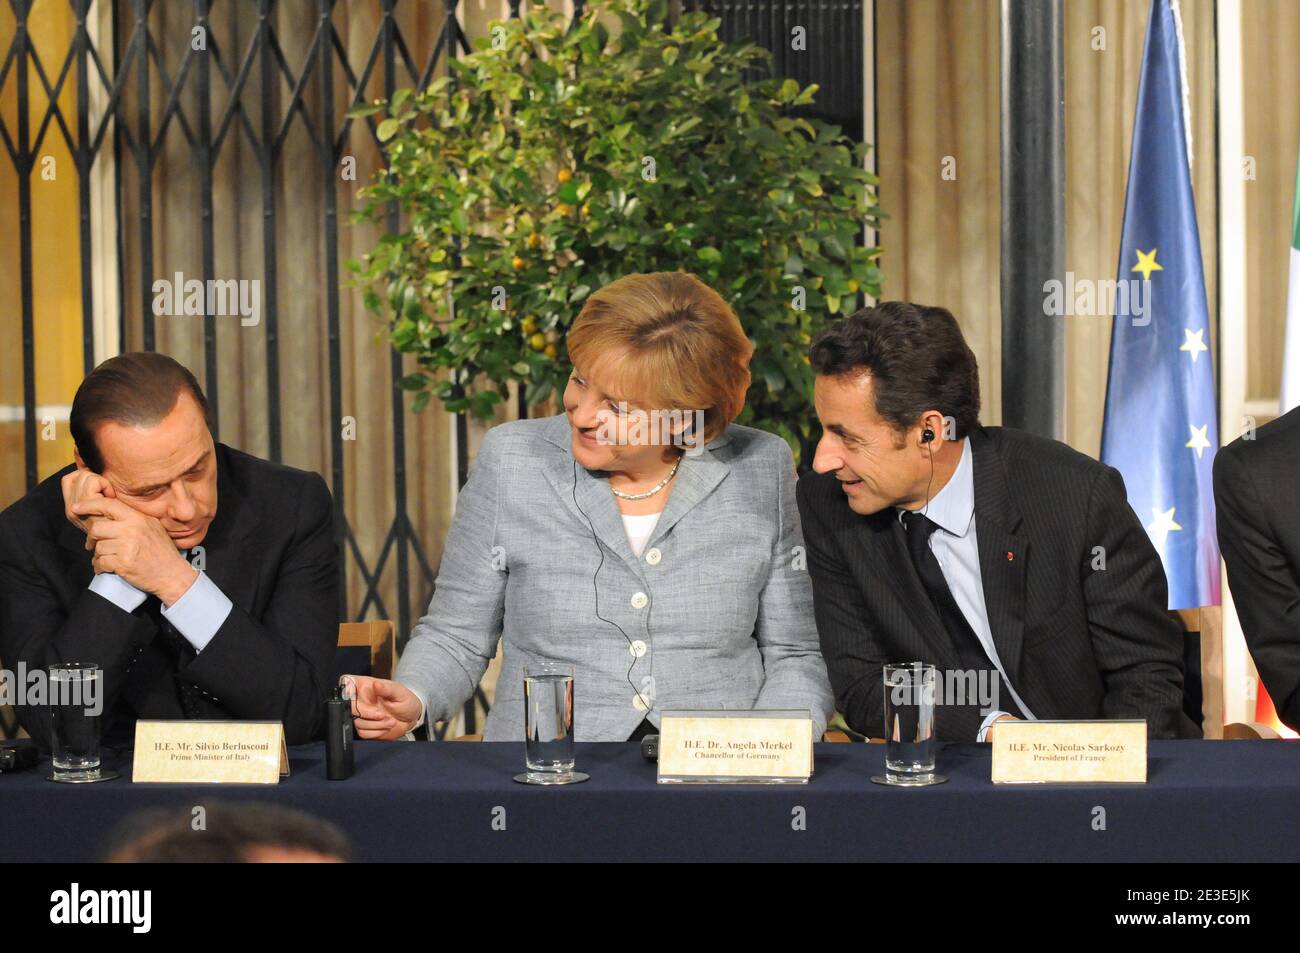 (R-L) French President Nicolas Sarkozy and German Chancellor Angela Merkel and Italian Prime Minister Silvio Berlusconi seen during a joint press conference with other European leaders at the residence of Israeli Prime Minister Ehud Olmert in Jerusalem, Israel on January 18, 2009. Photo by Ammar Abd Rabbo/ABACAPRESS.COM Stock Photo